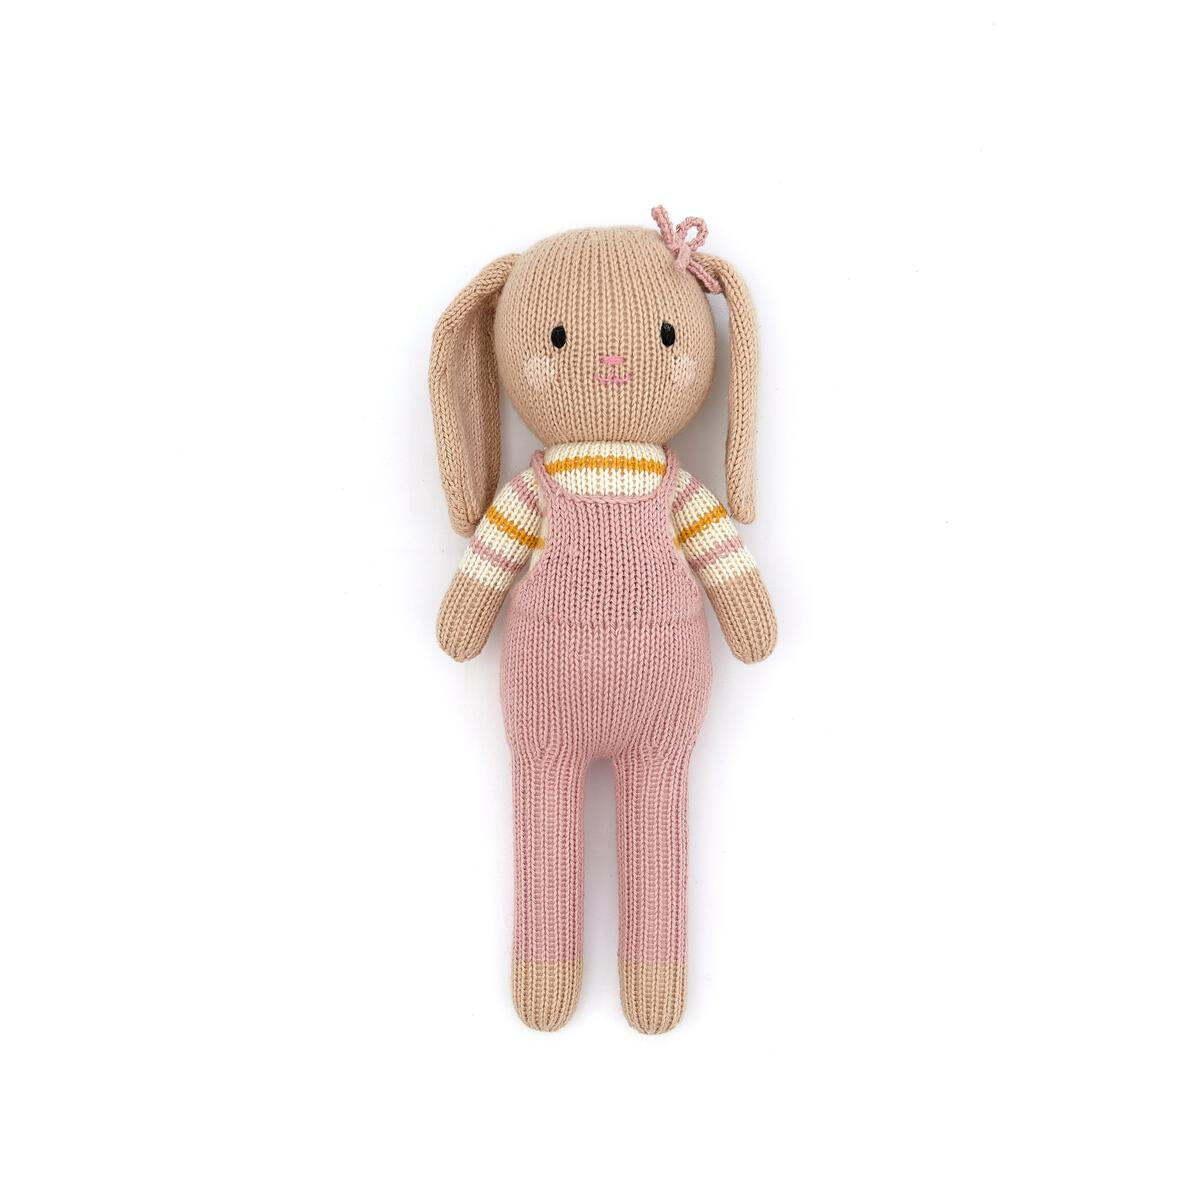 Pia the Bunny in Pink Overall